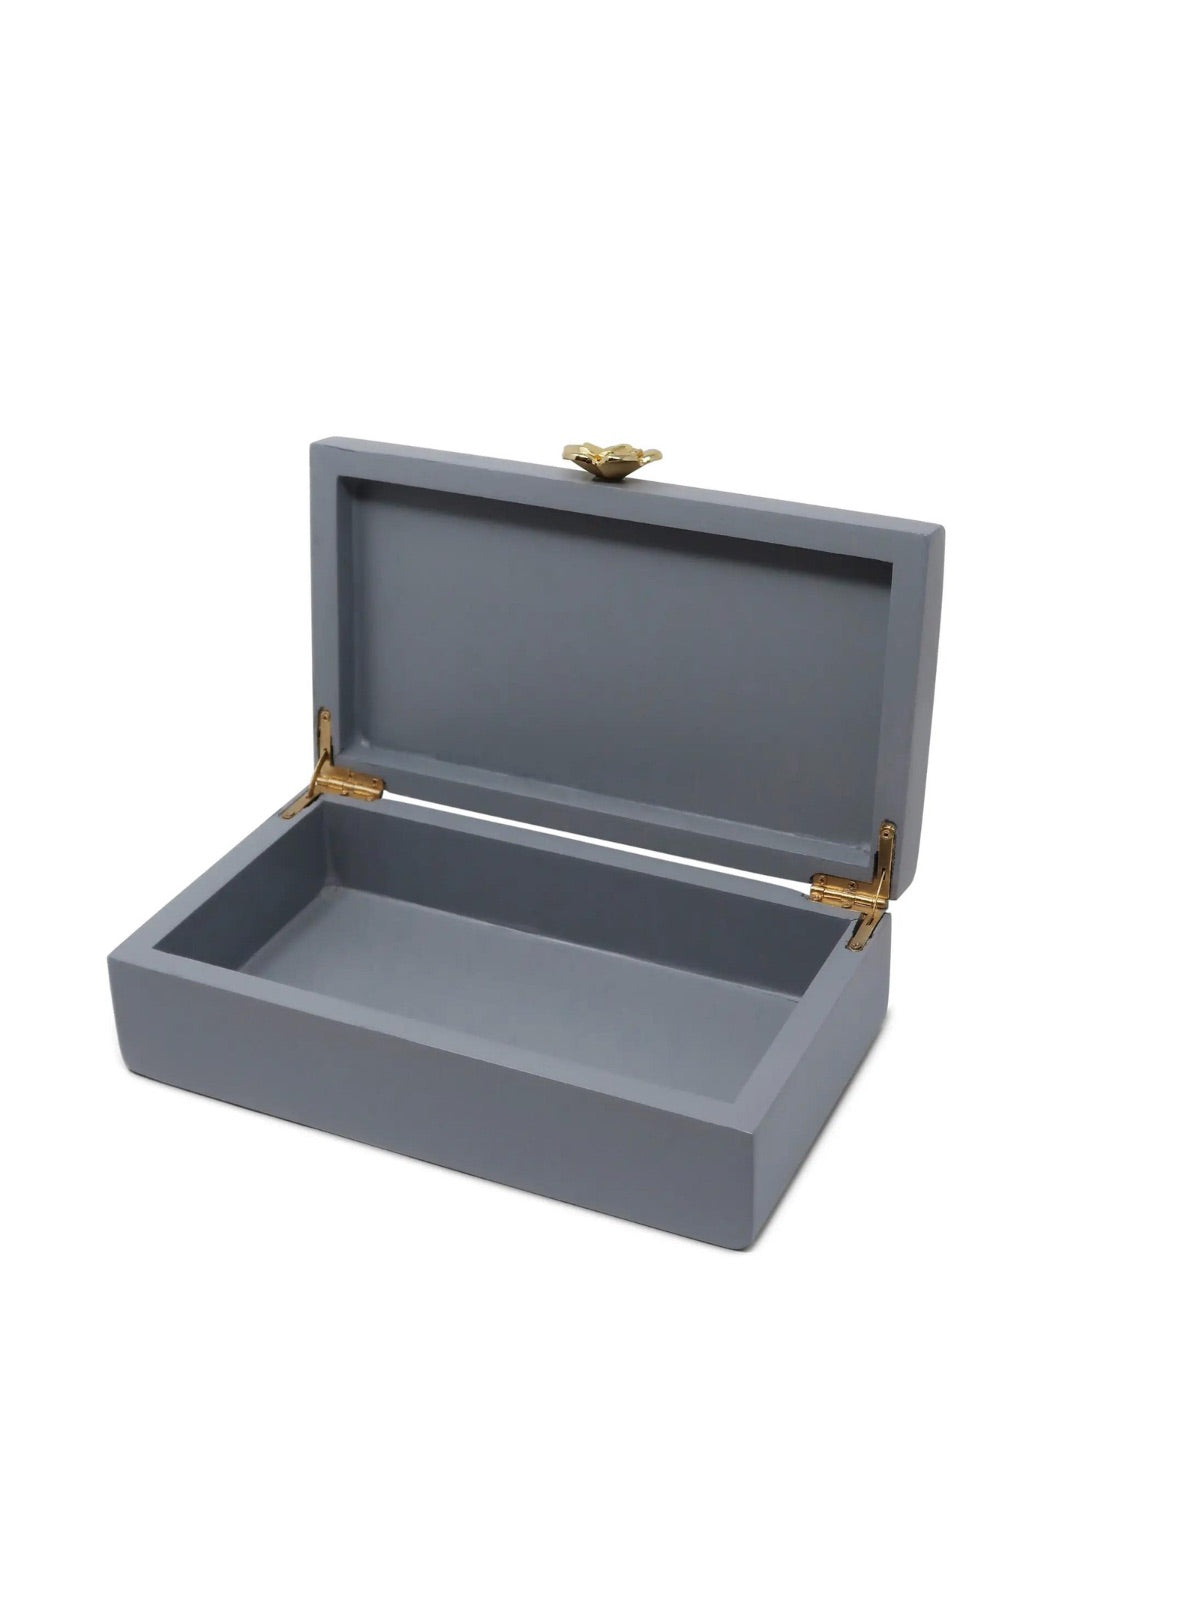 12 inch Grey Wood Decorative Box with Gold Flower Detail with Open Cover.